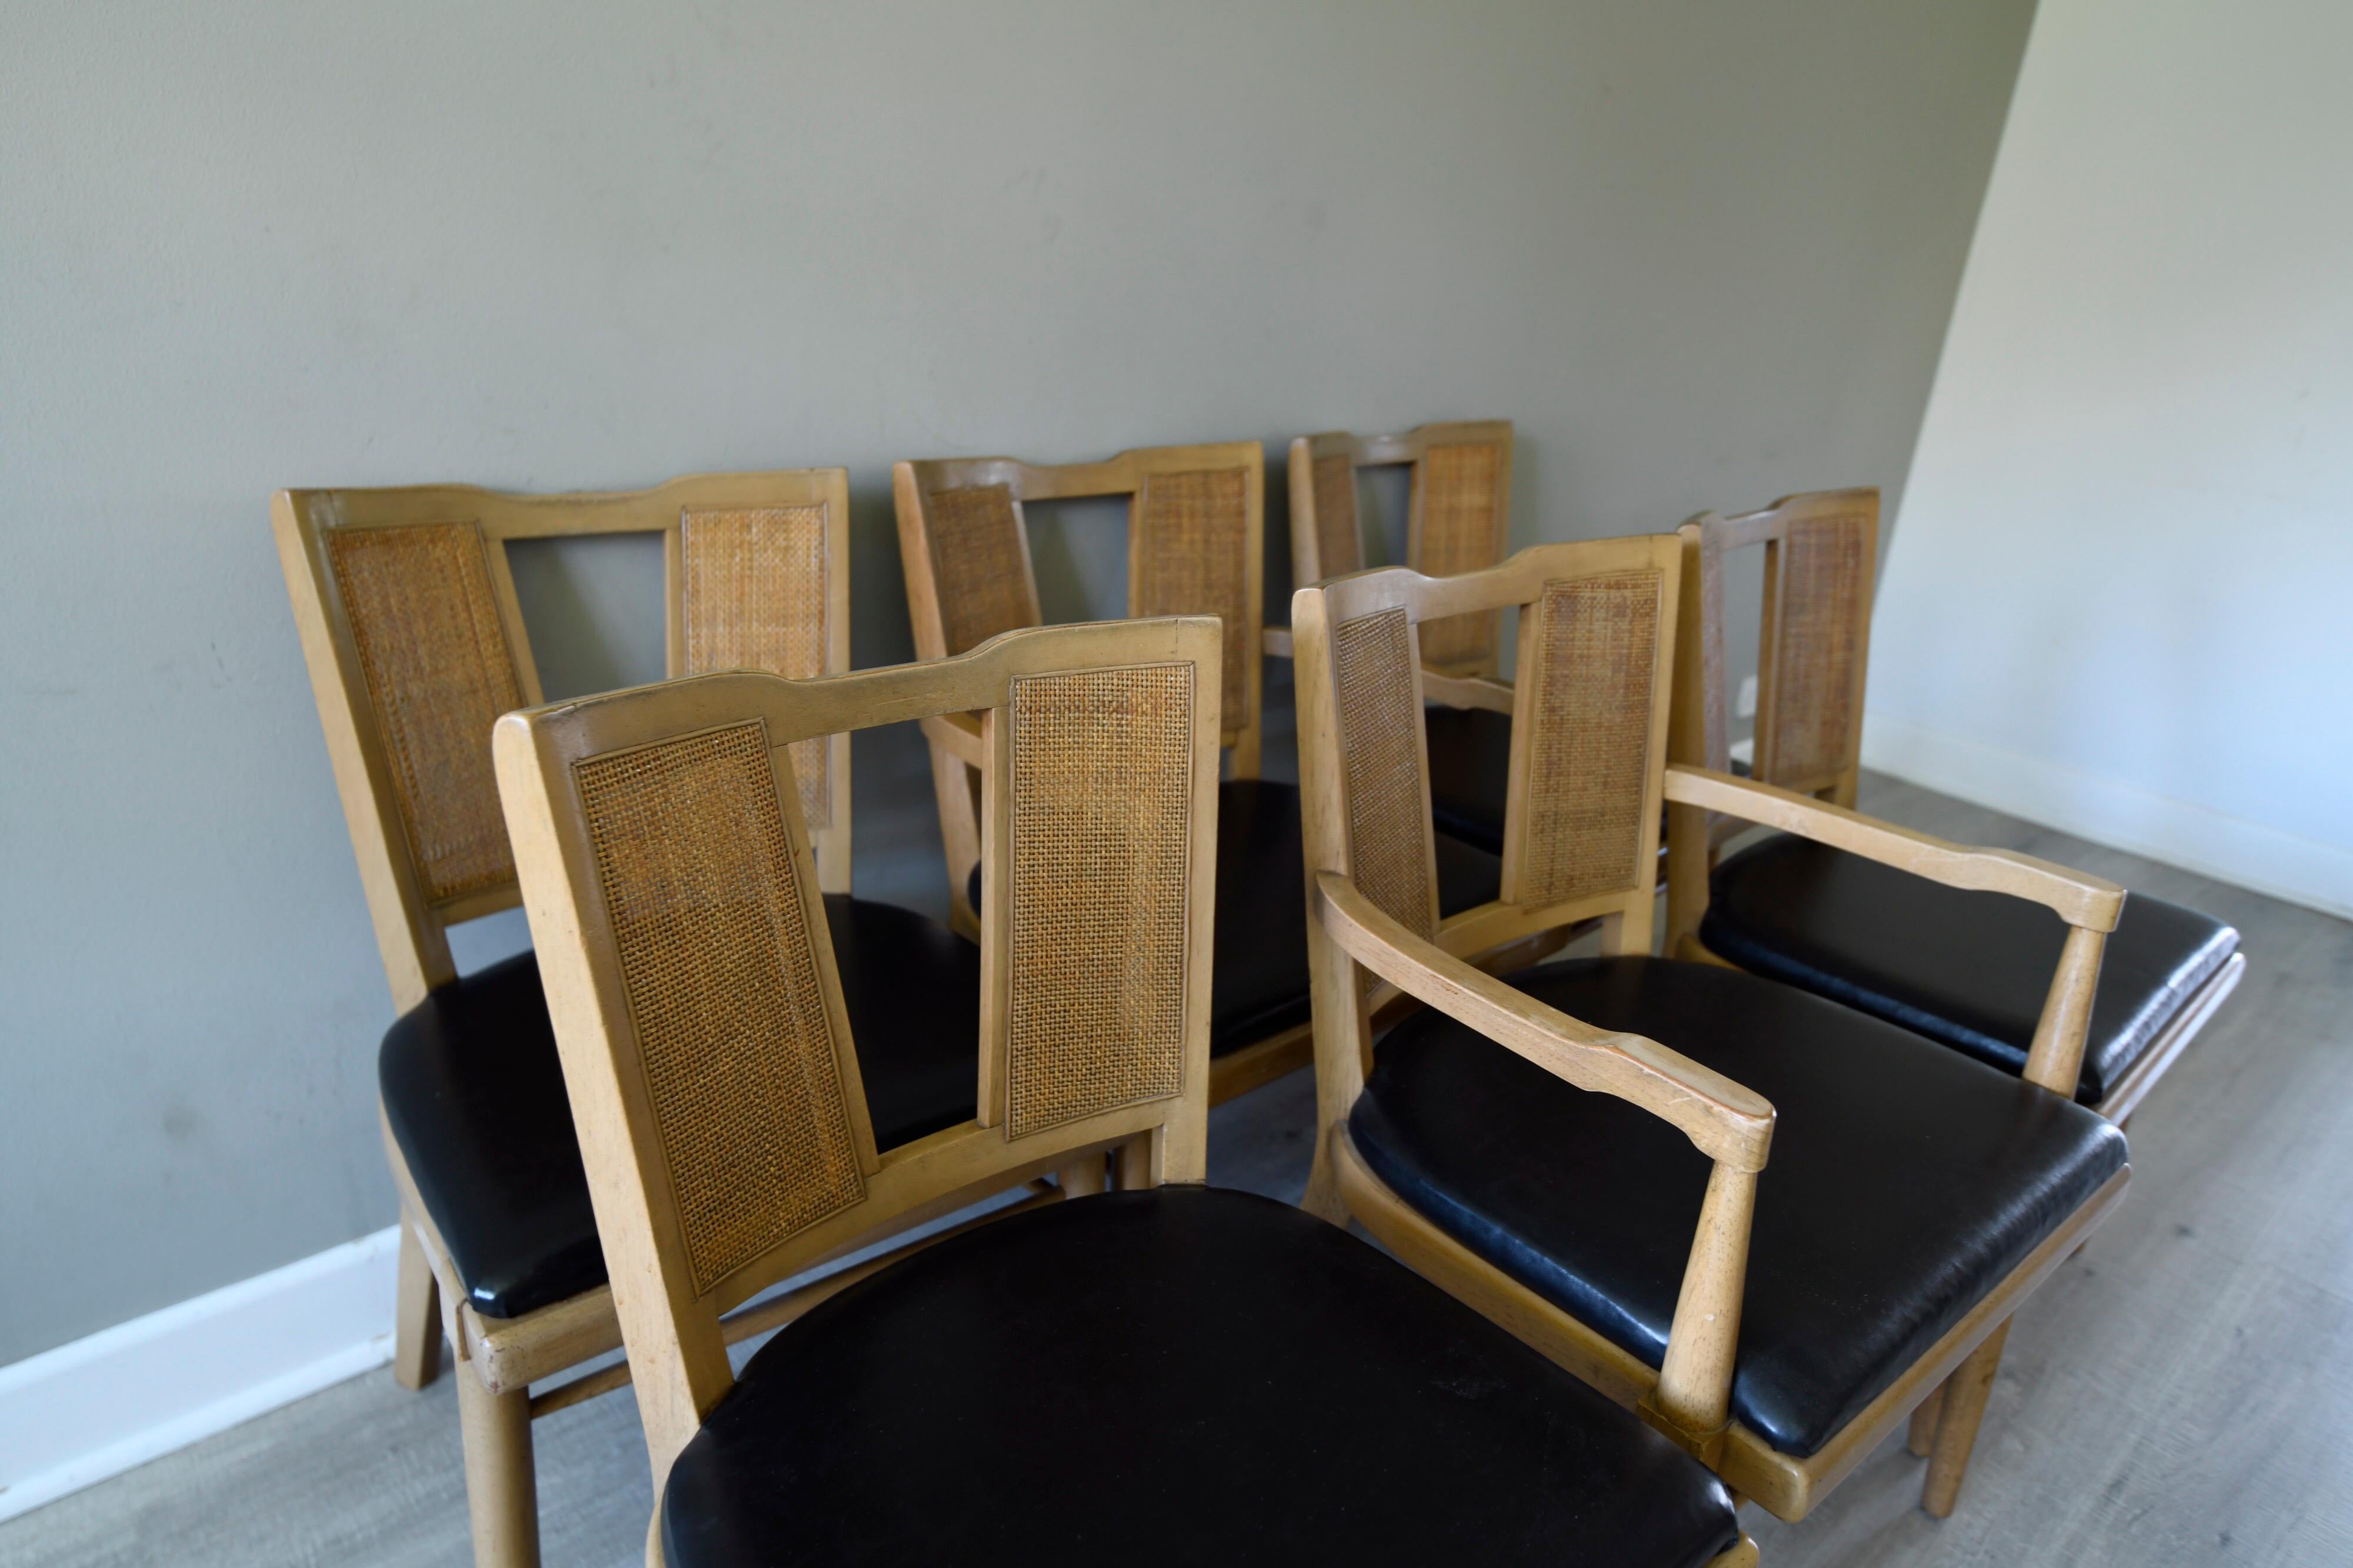 6 American of Martinsville dining chairs designed by Merton L Gershun with a sublime aged lacquer open caned weave backs 2 of the chairs being carvers it has Asian influences with a Hollywood Regency feel with original black vinyl.